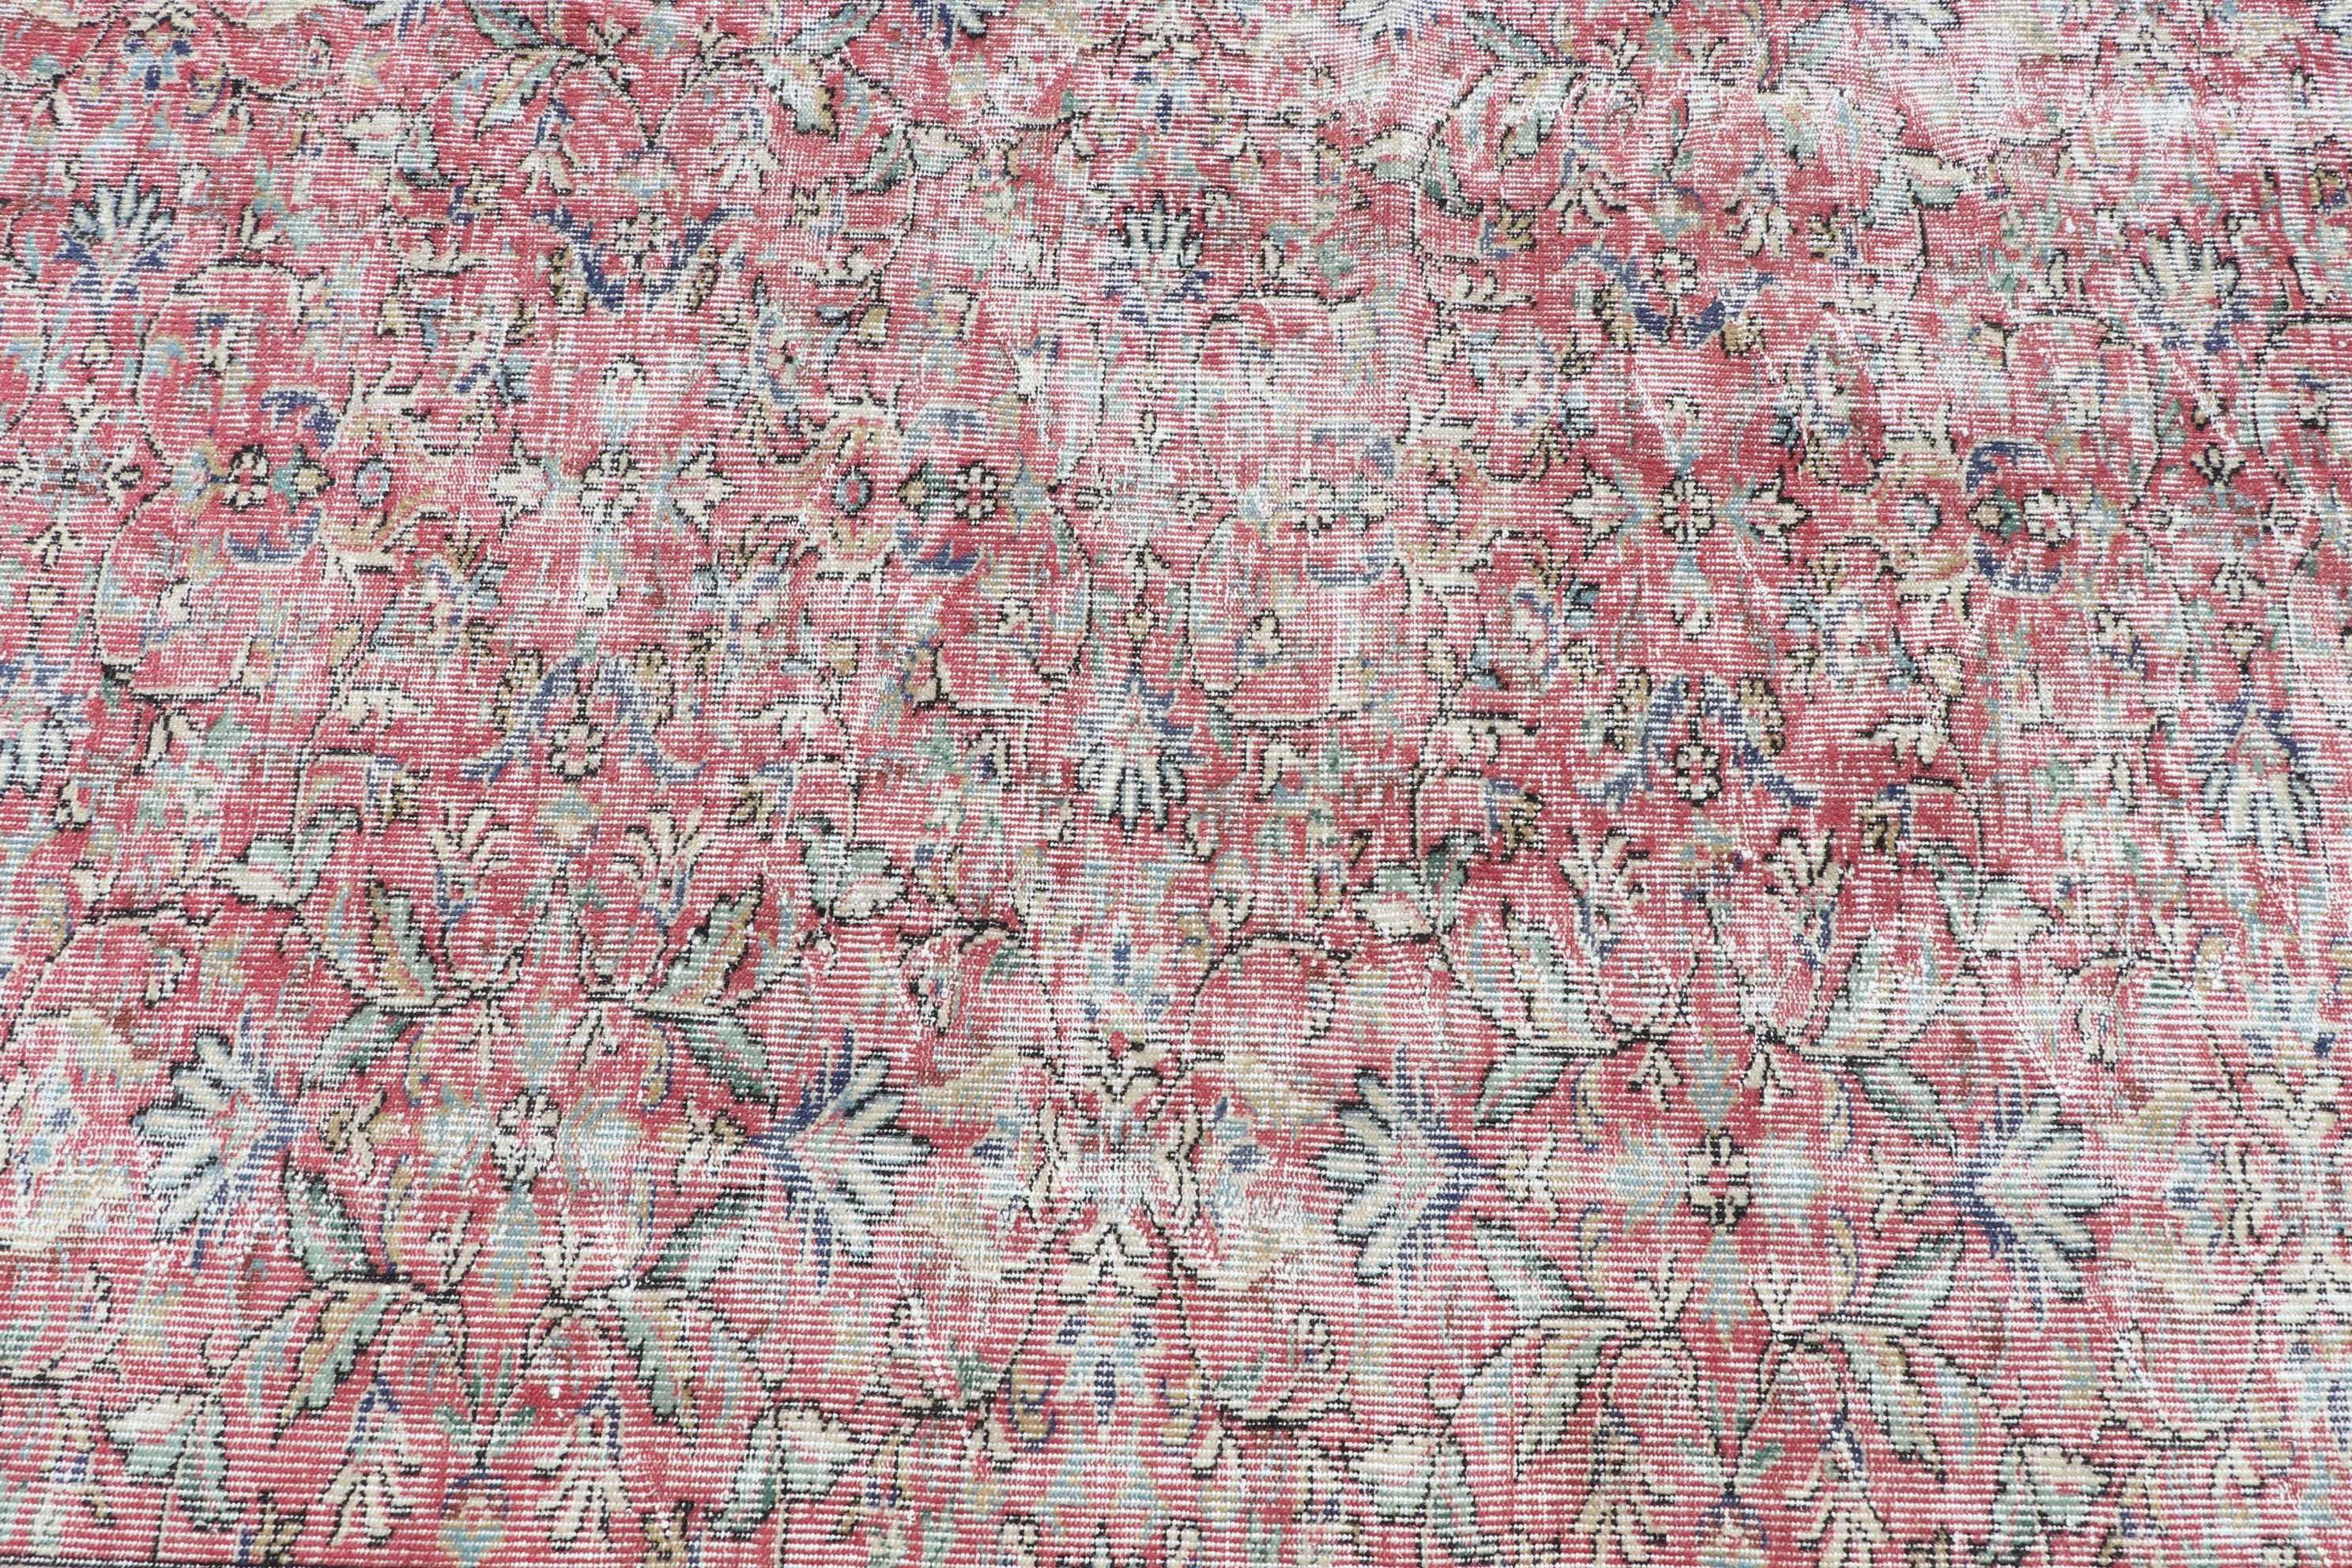 Pink Antique Rugs, Kitchen Rugs, Dining Room Rug, Cute Rugs, Bedroom Rugs, Rugs for Salon, 6.4x9.5 ft Large Rugs, Turkish Rug, Vintage Rugs